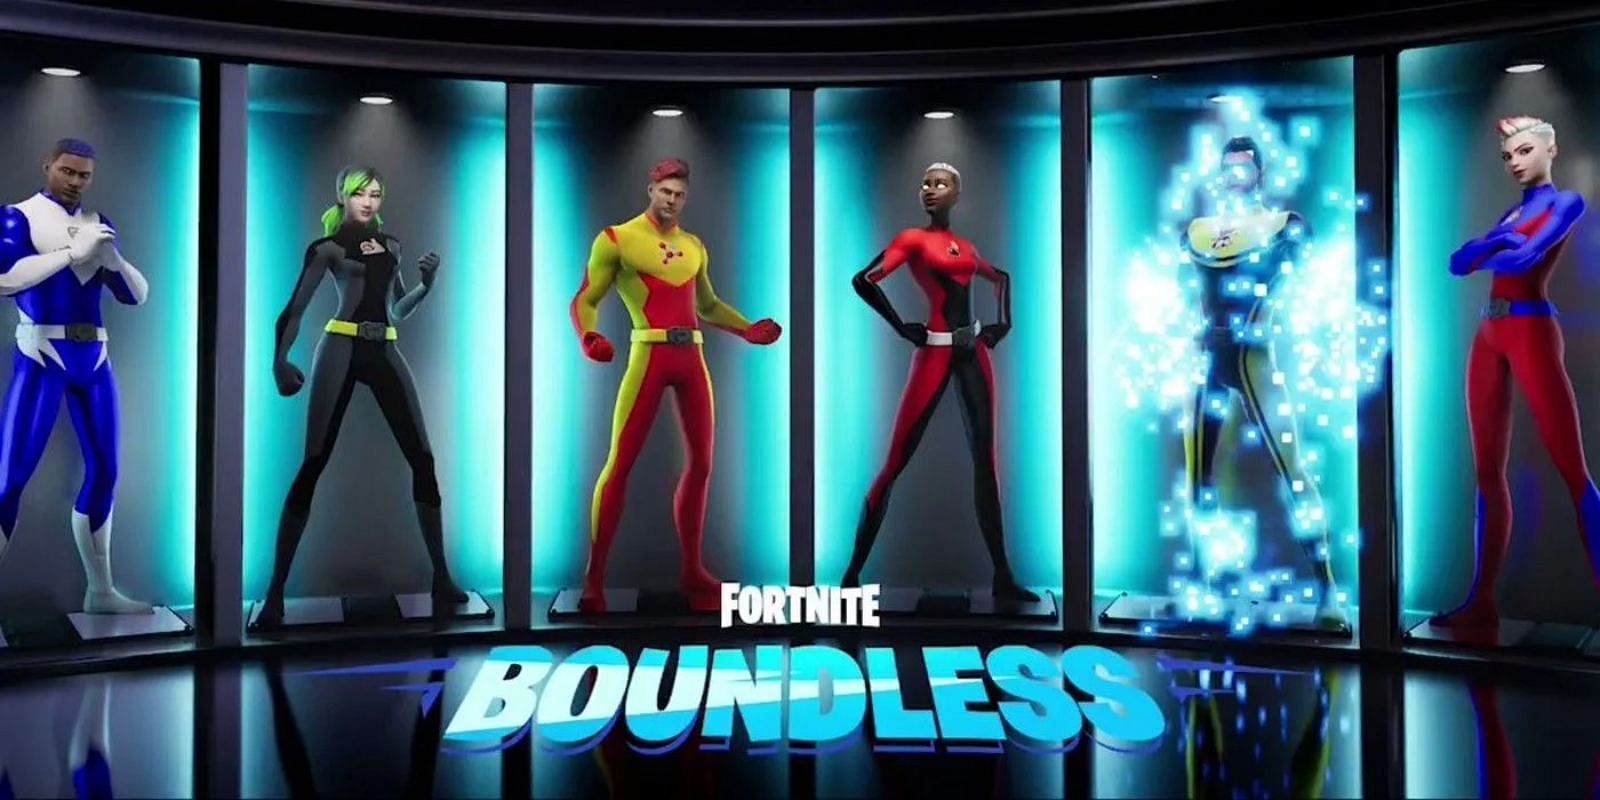 Boundless skins were totally customizable, making them diverse in their advantage (Image via Epic Games)